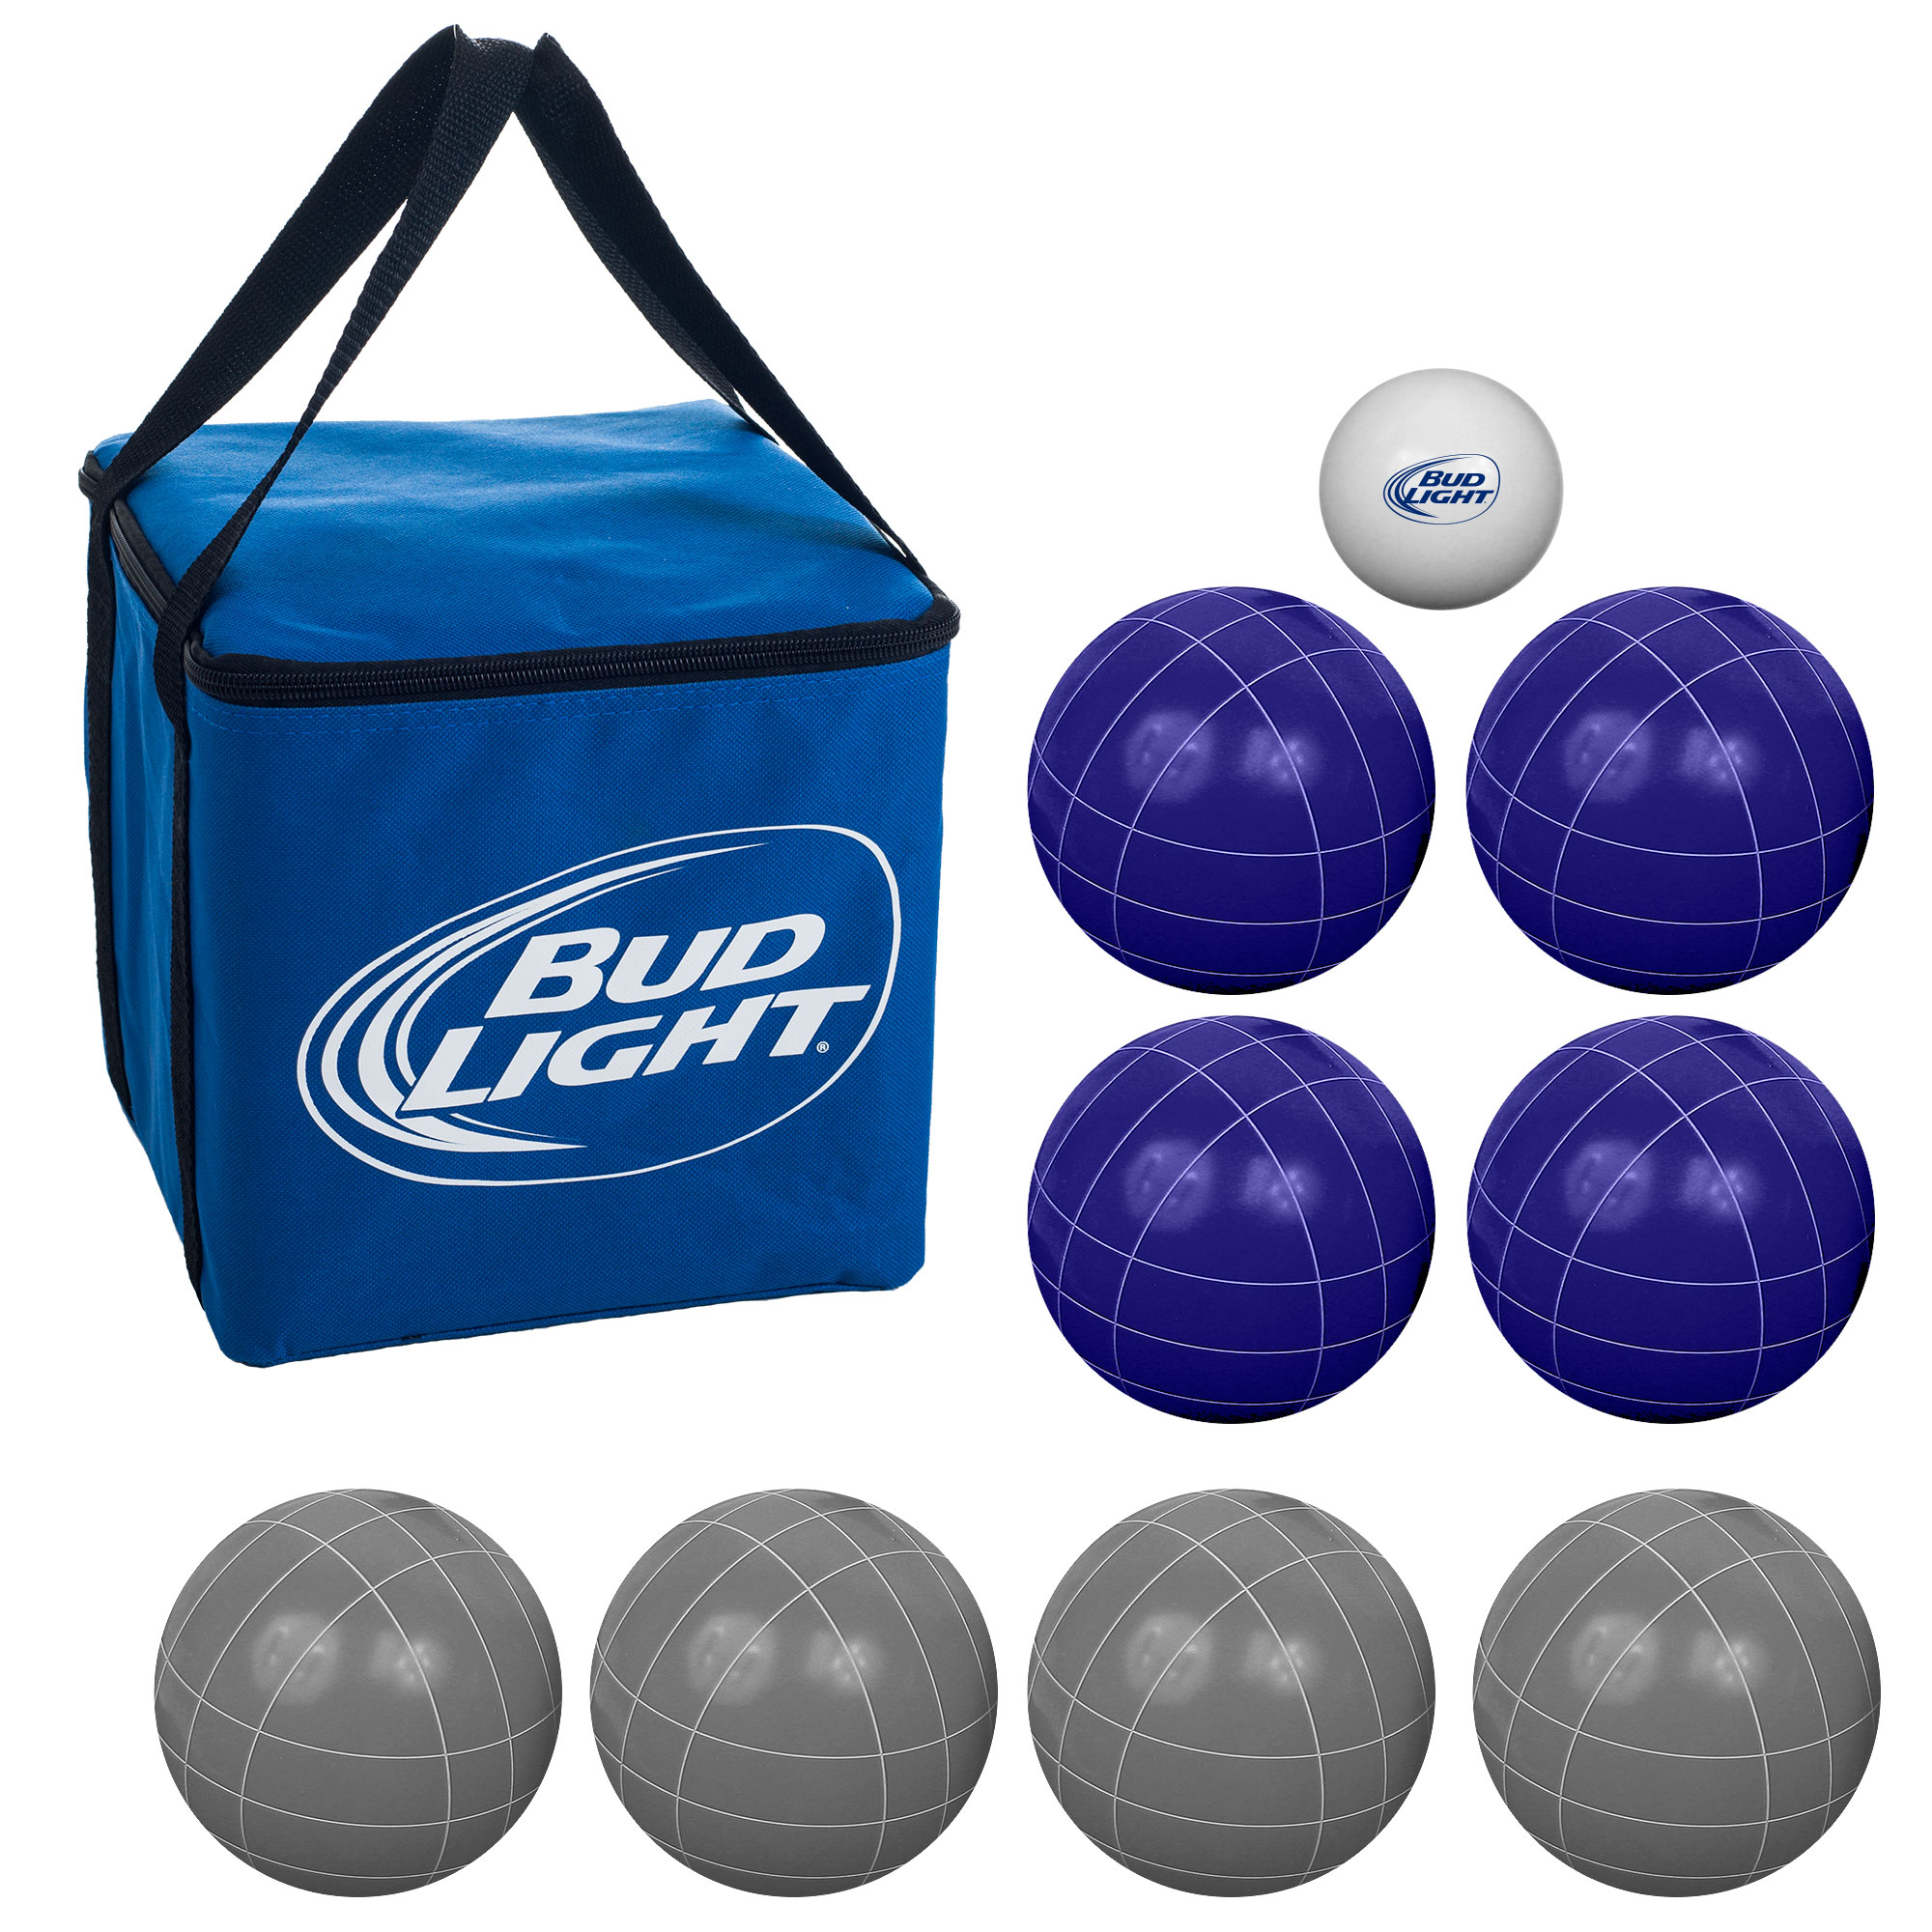 Bocce Ball Set- Regulation Outdoor Family Bocce Game and Carrying Case by Hey! Play! (Bud Light) - image 2 of 2